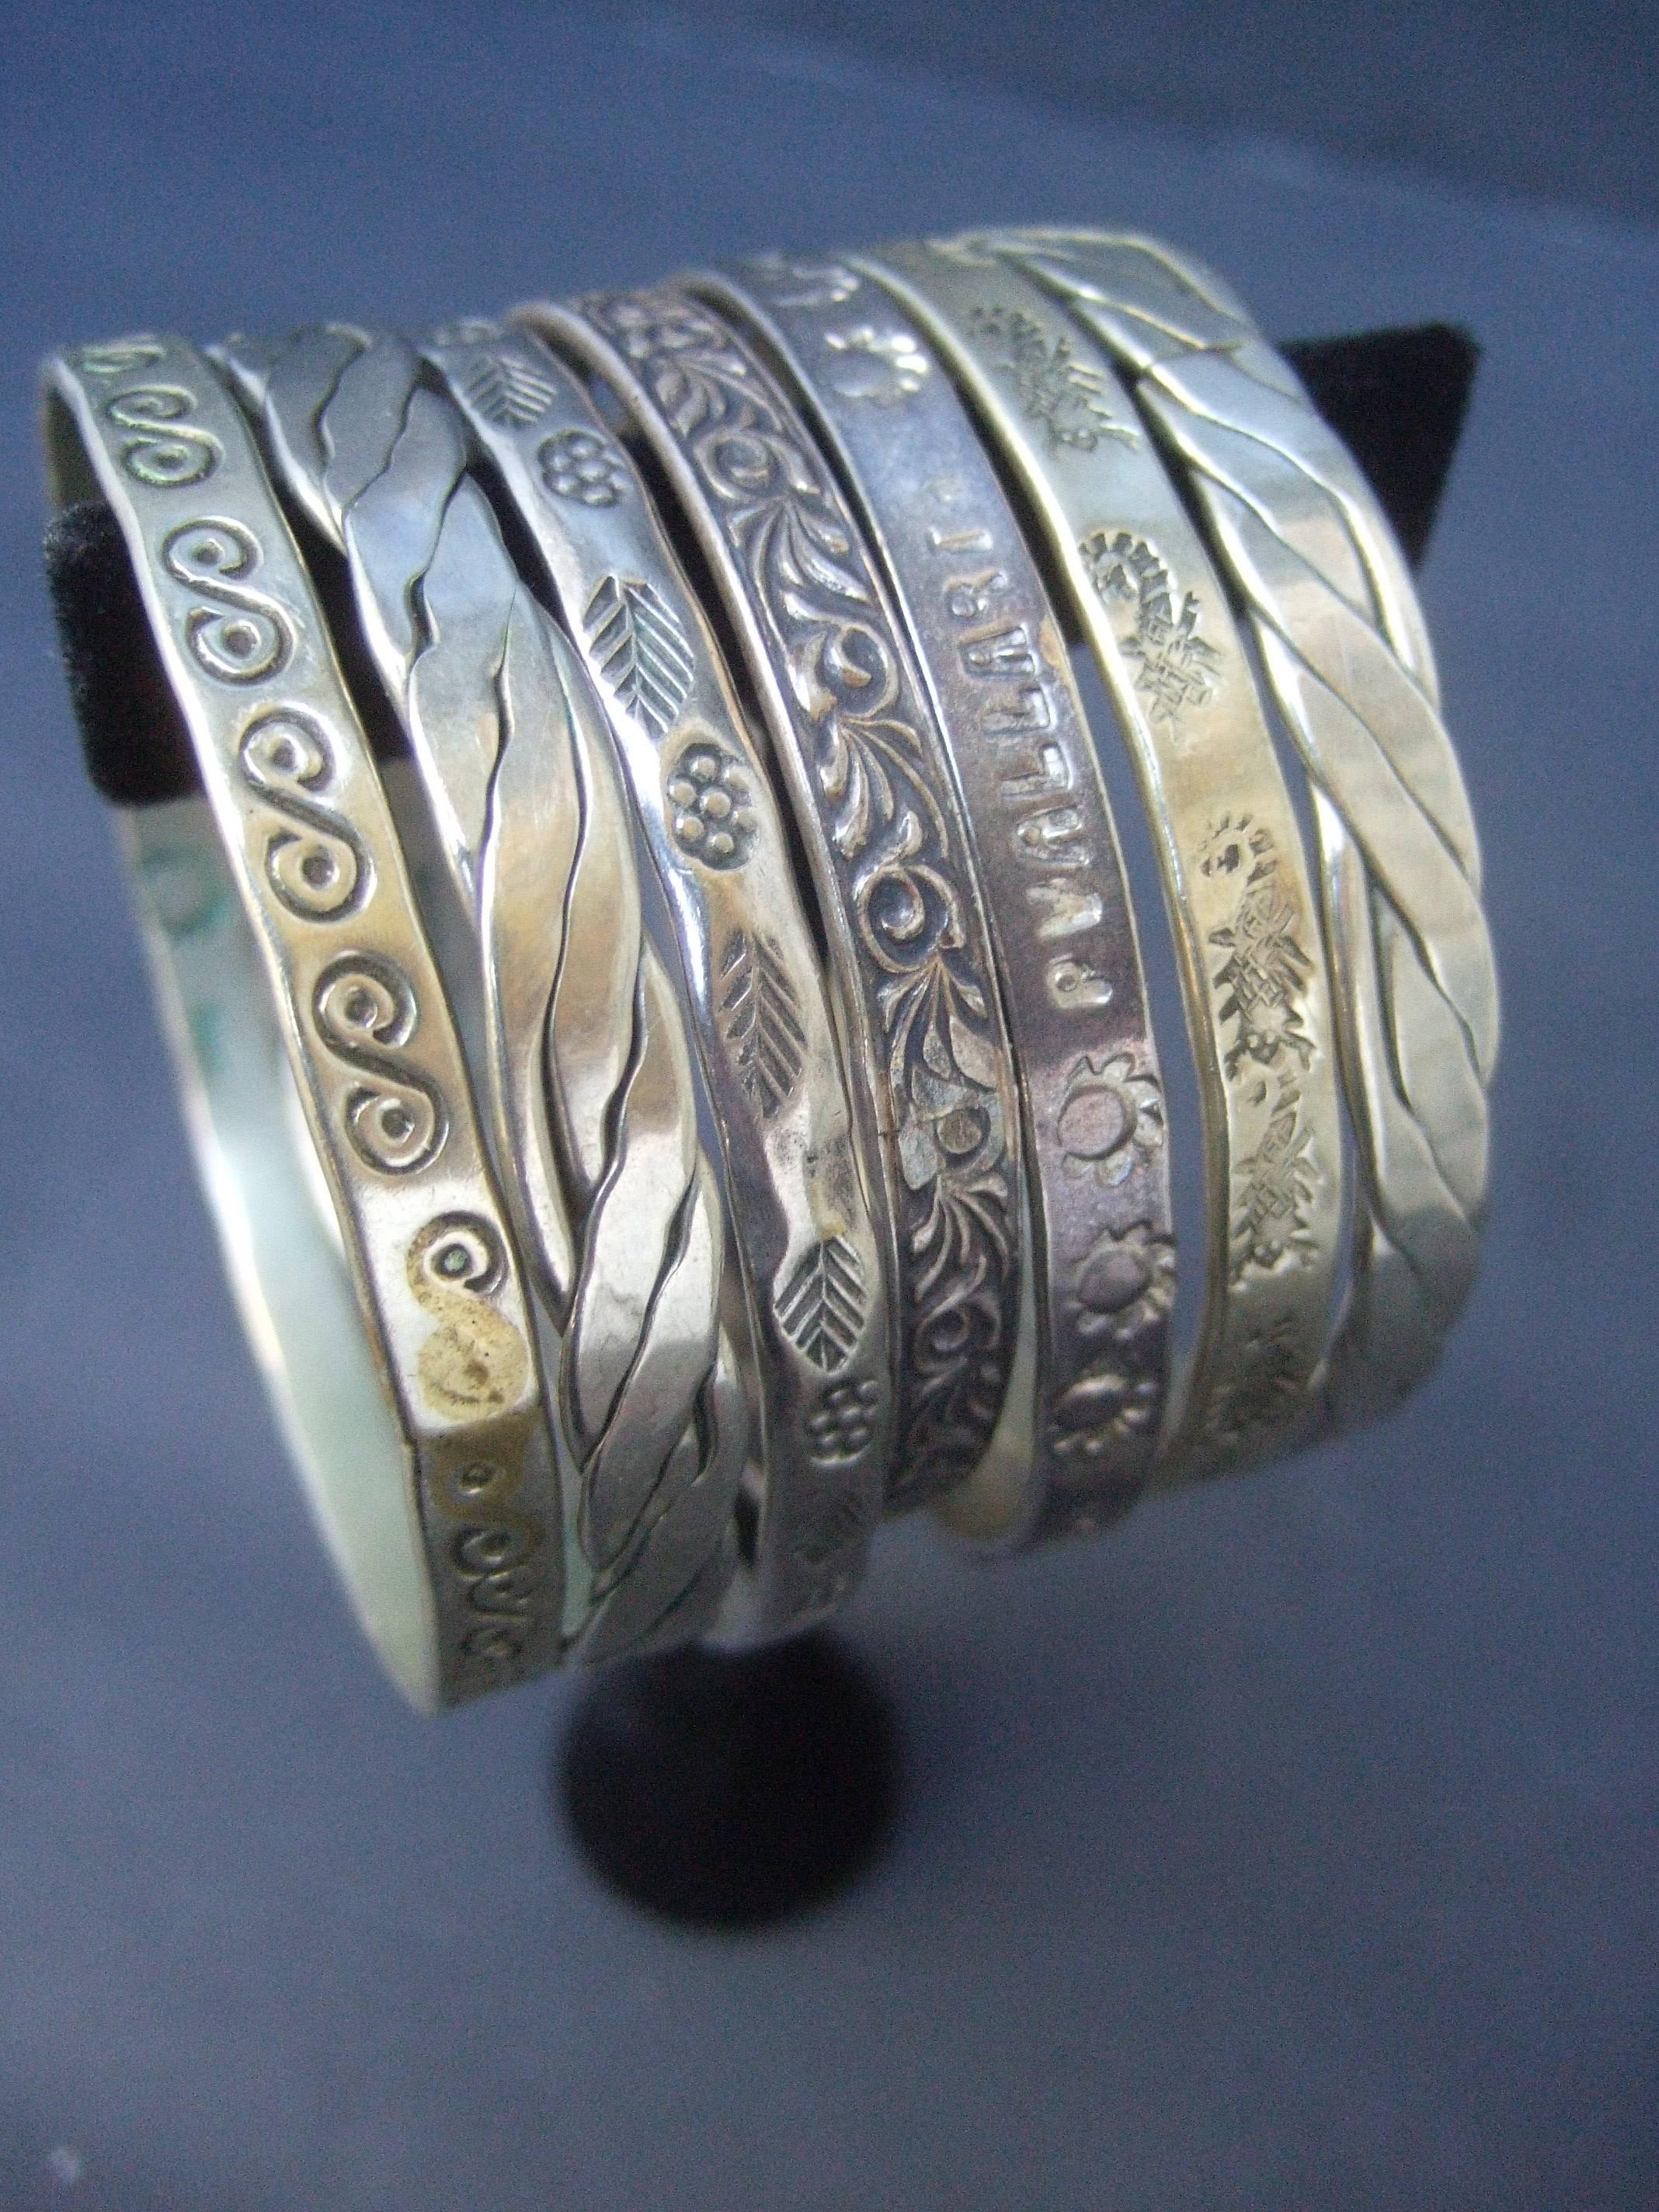 Wonderful group of Mexican sterling bangle bracelets 
The collection of seven vintage artisan bracelets 
are designed with various stamped designs and
styles

The trendy bracelets can be worn all together
or in smaller amounts or divided on